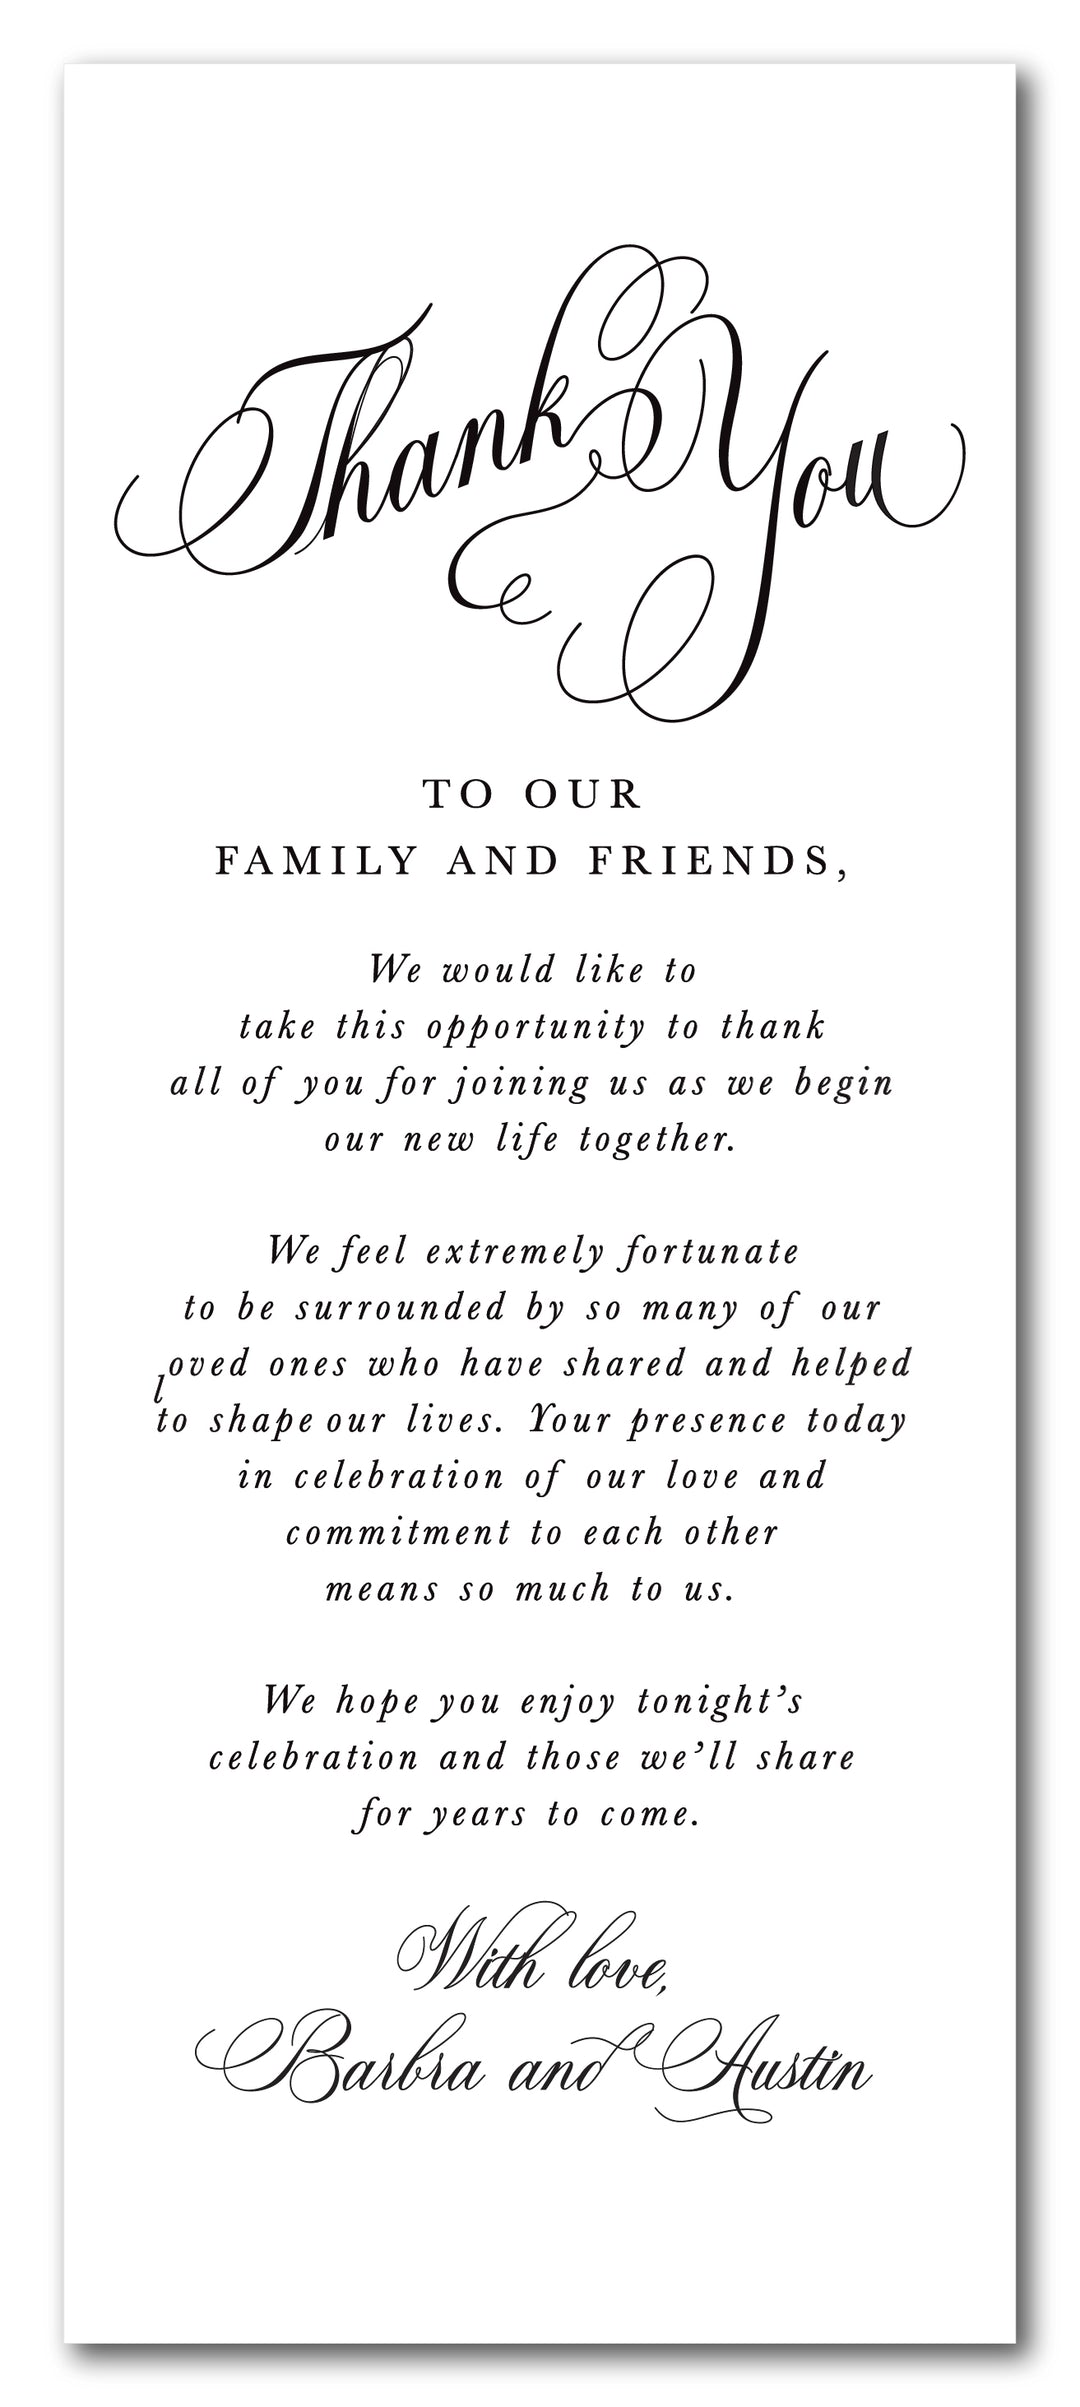 The Barbra Thank You Place Setting Card